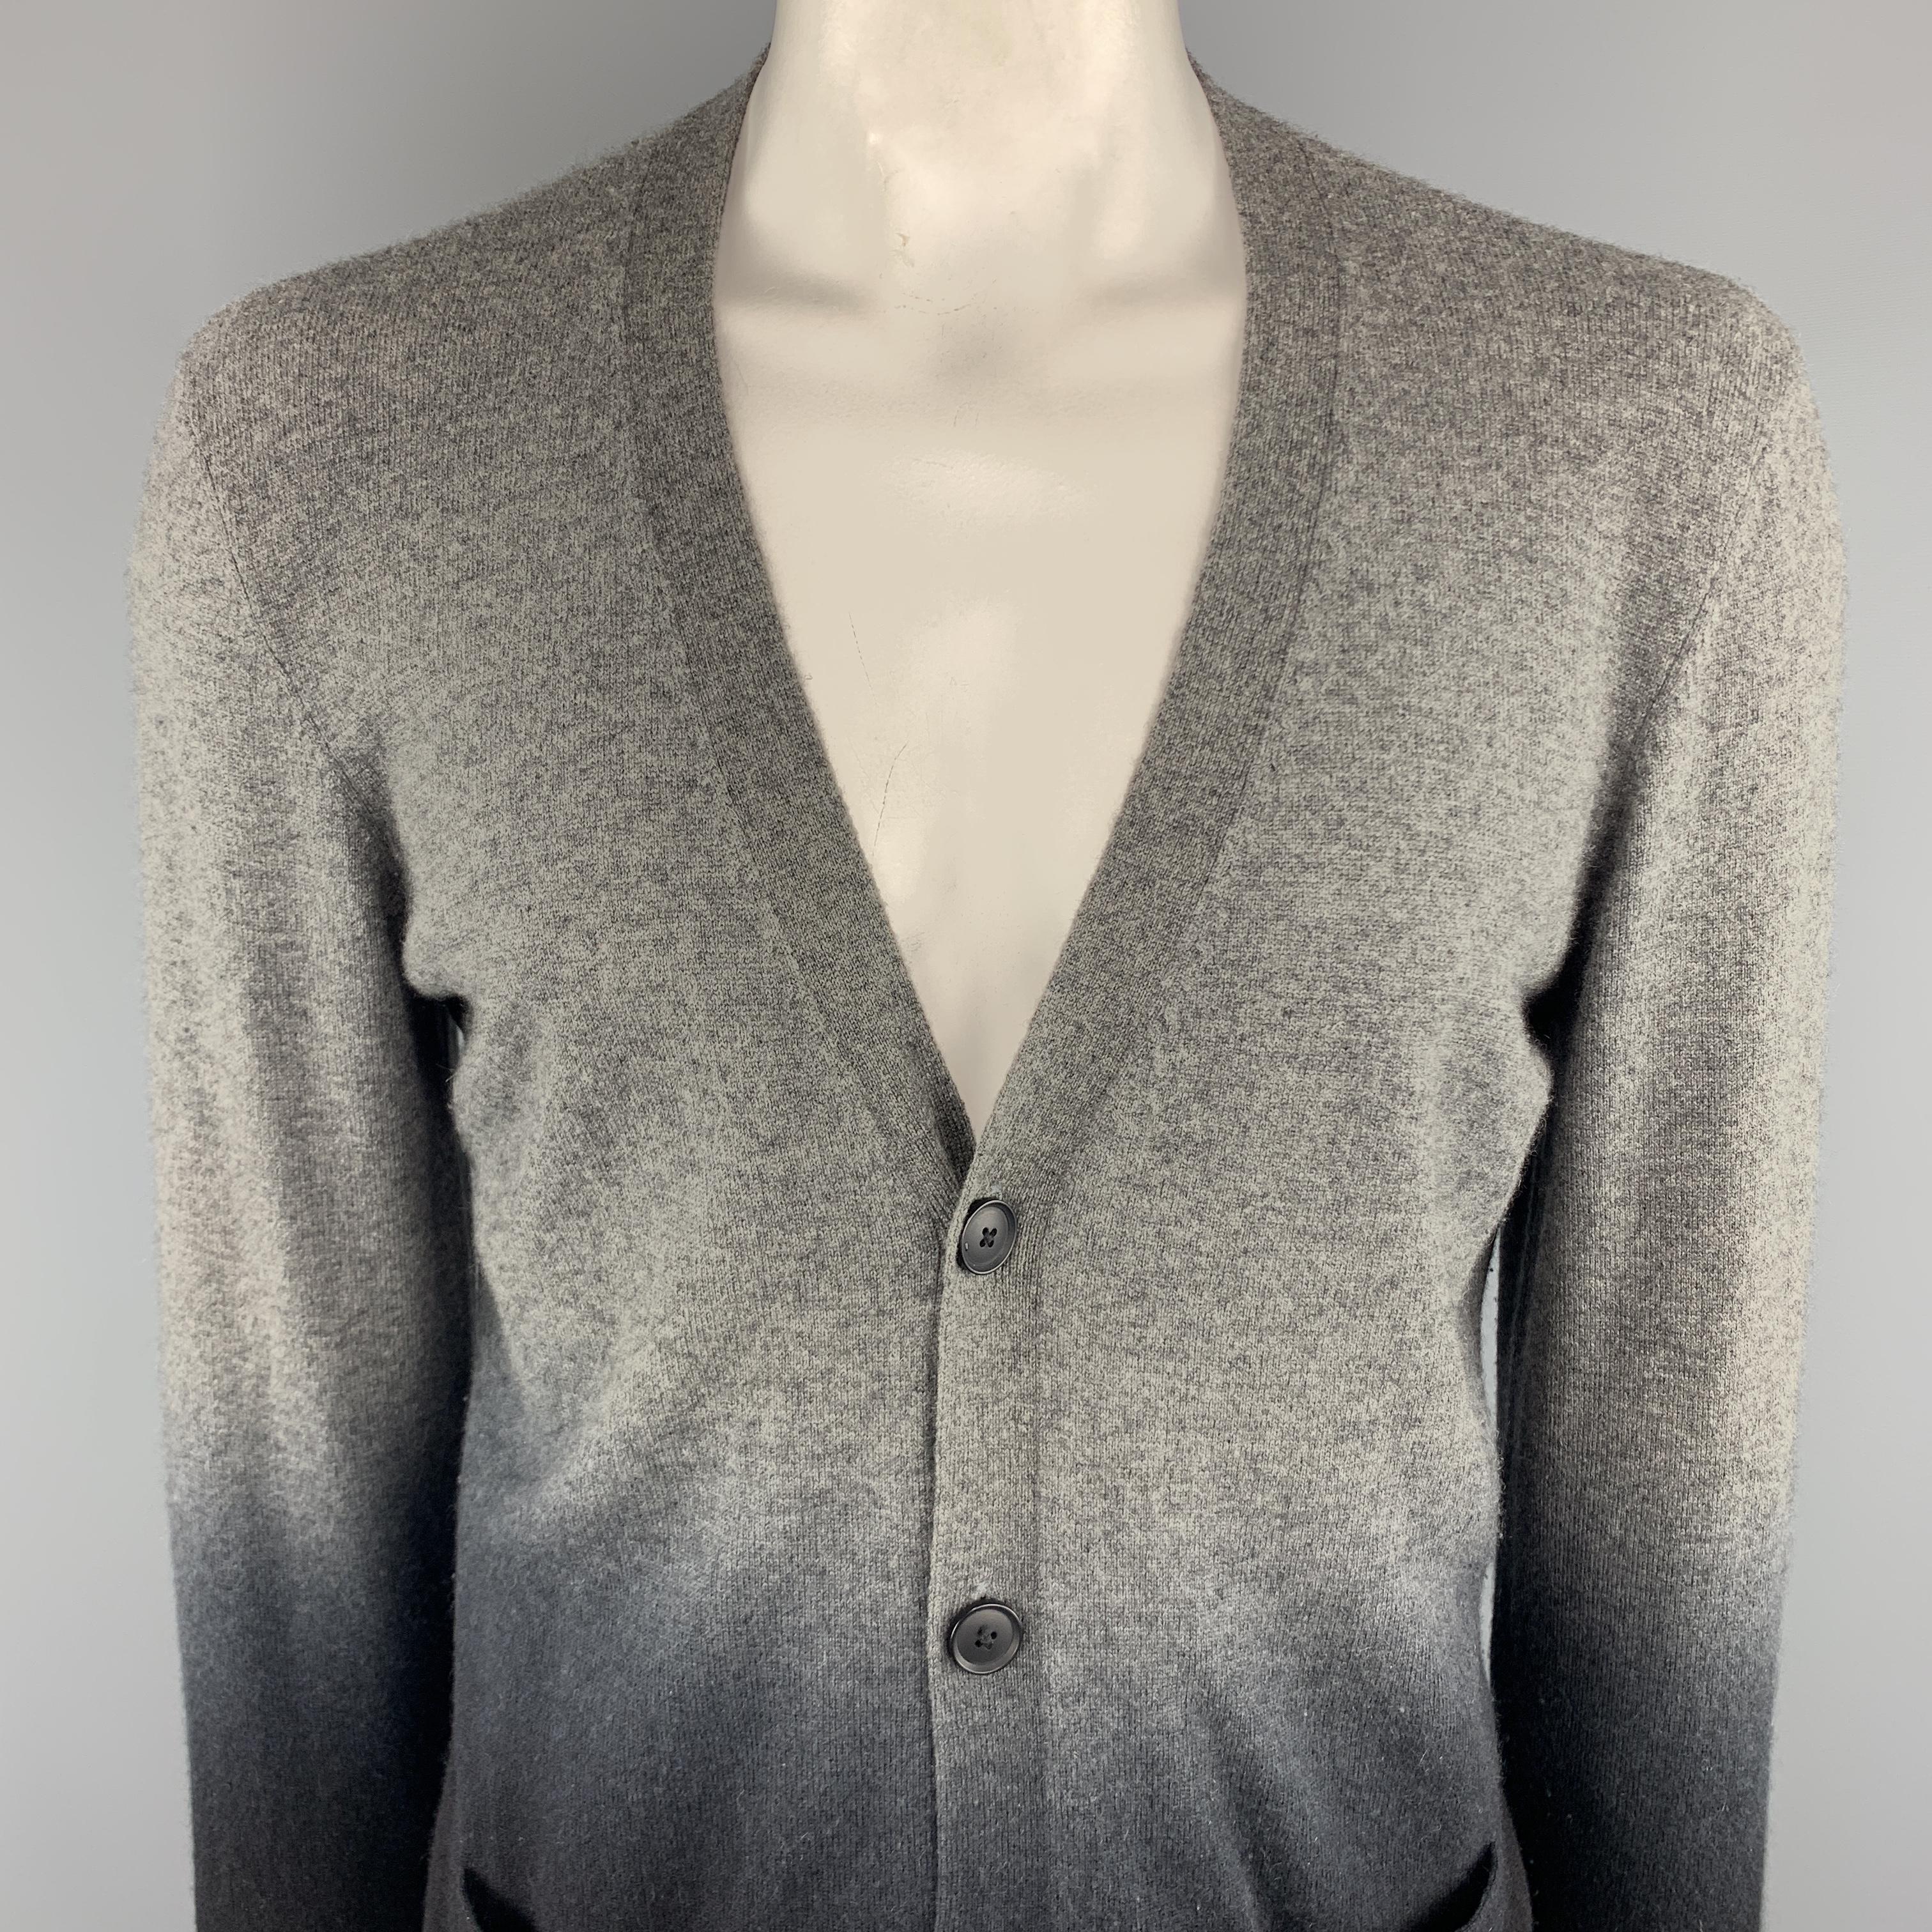 VINCE Cardigan Sweater comes in black and grey tones in an ombre cashmere  material, with a V-collar, long sleeves, front pockets, and ribbed cuffs and hem.
 
Very Good Pre-Owned Condition.
Marked: XL
 
Measurements:
 
Shoulder: 20 in.
Chest: 46